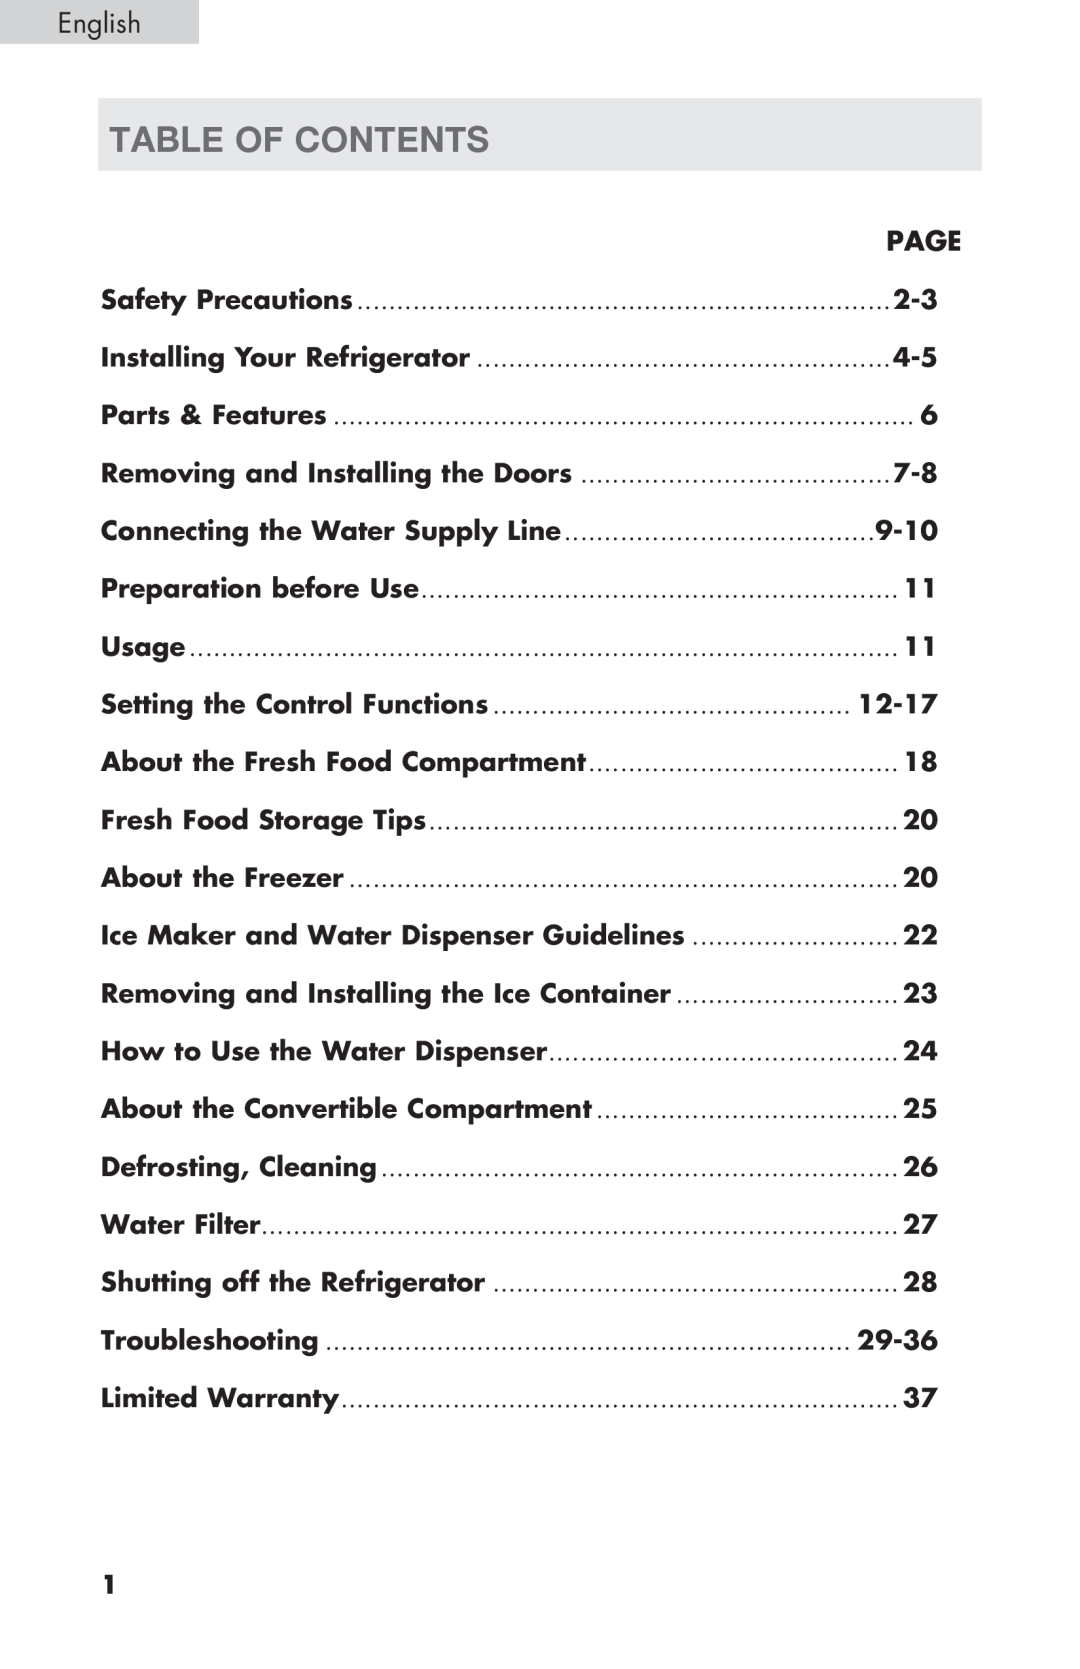 Haier PRFS25 user manual table of contents, English, Page, 9-10, Setting the Control Functions, 12-17, 29-36 